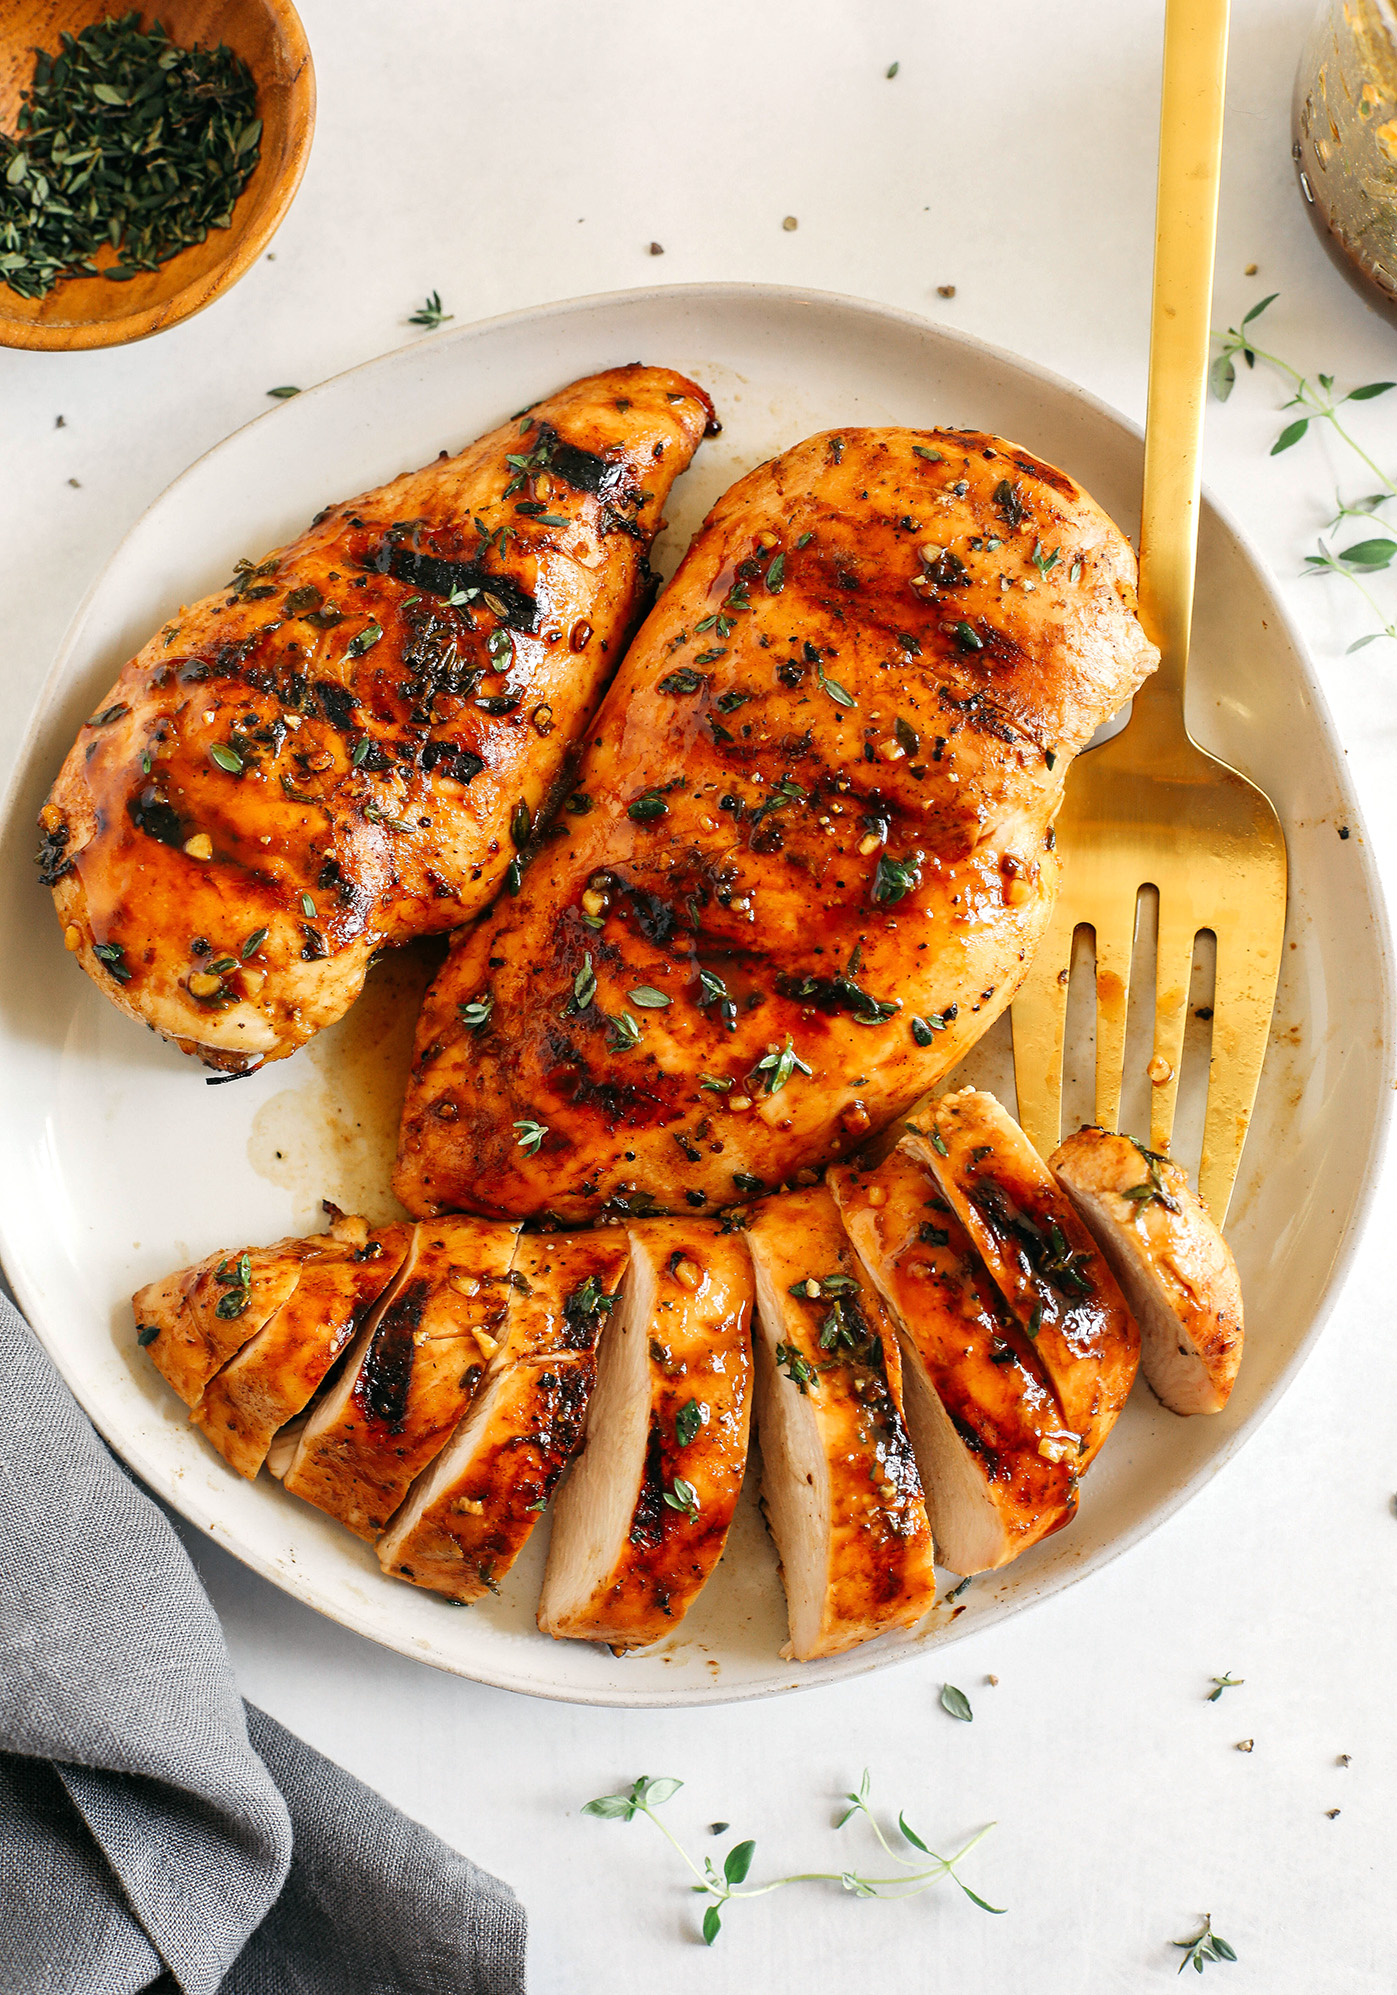 Moist and juicy chicken breasts marinated in a rich maple balsamic herb glaze, seasoned with fresh herbs, and grilled to perfection for a healthy weeknight meal!